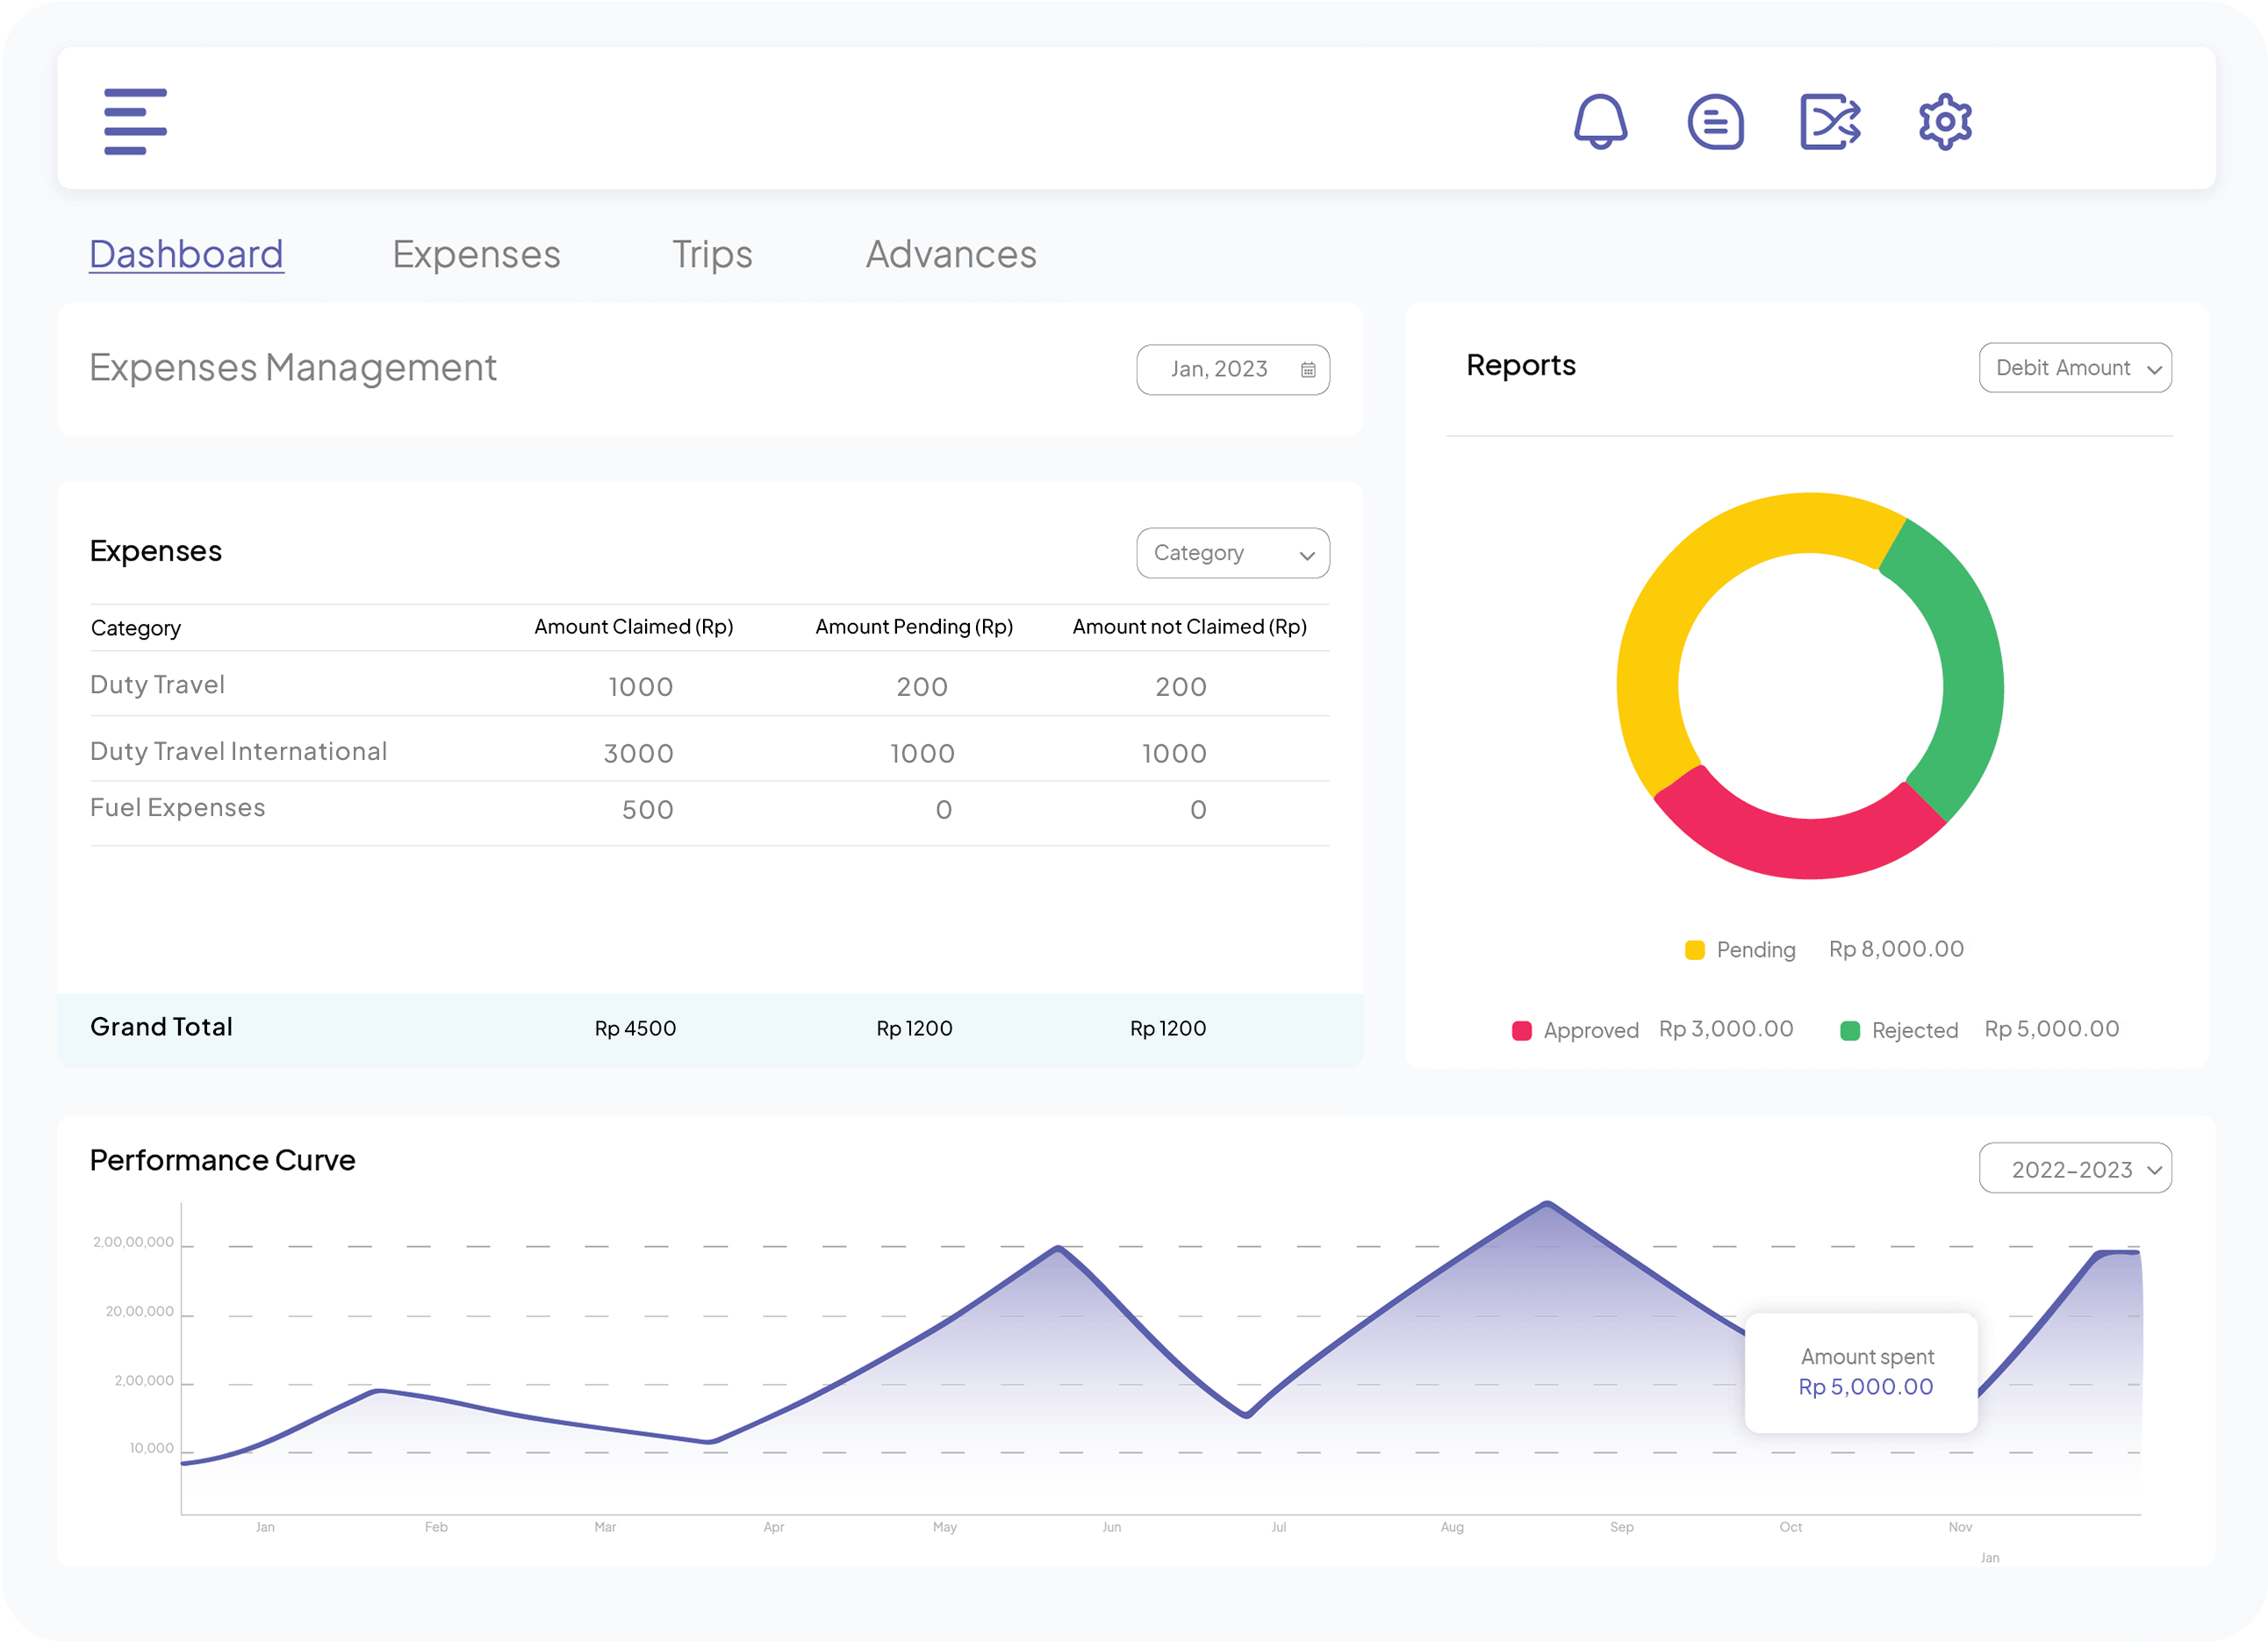 Expense management dashboard in Indonesia